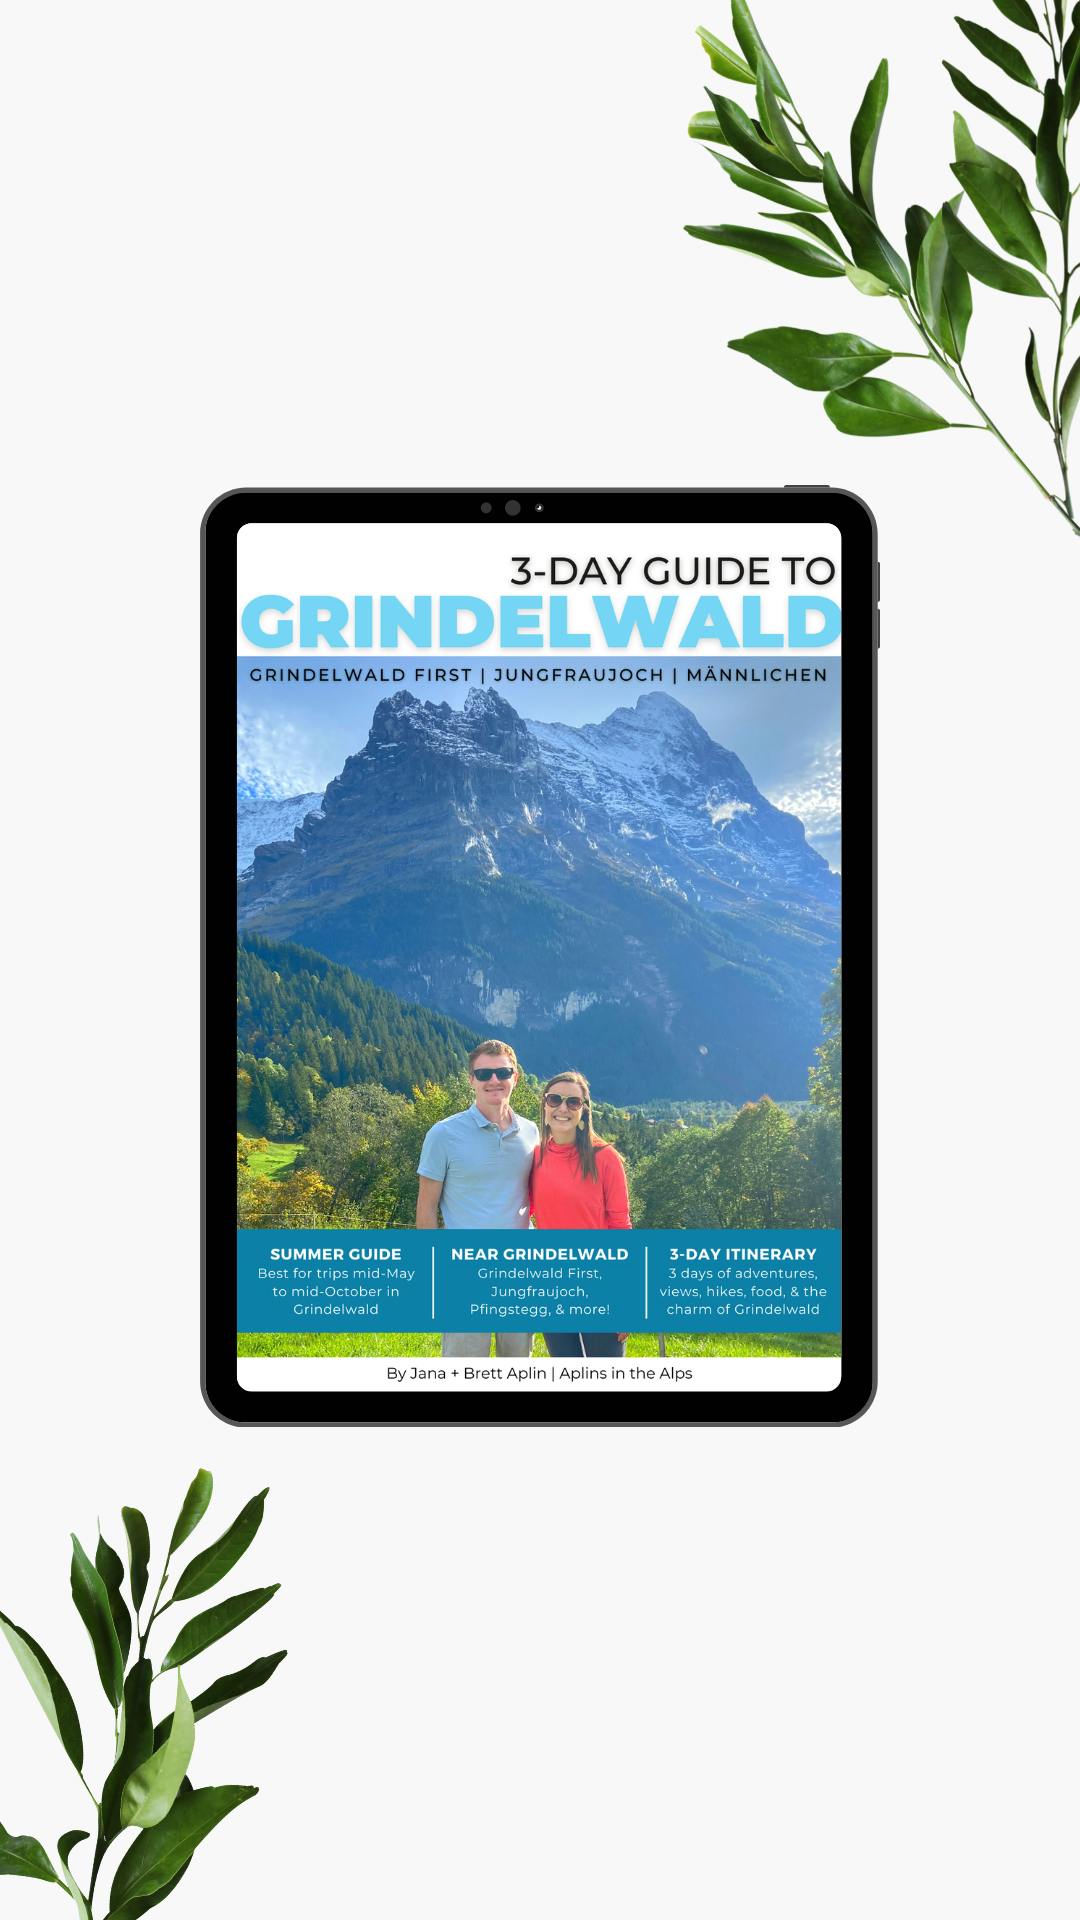 3-Day Guide to Grindelwald, Switzerland